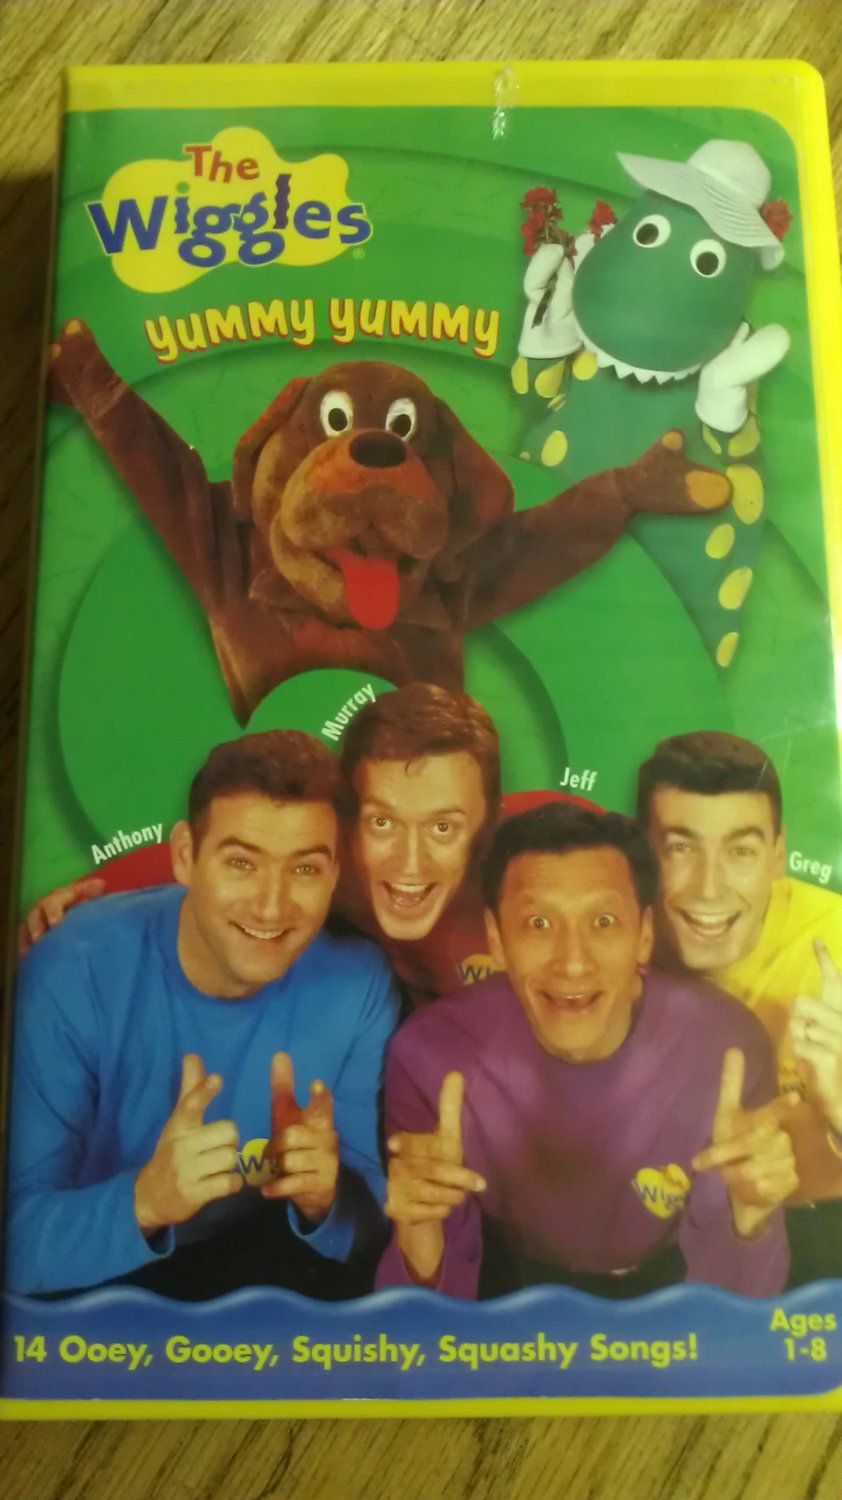 The Wiggles Yummy Yummy Vhs Clamshell